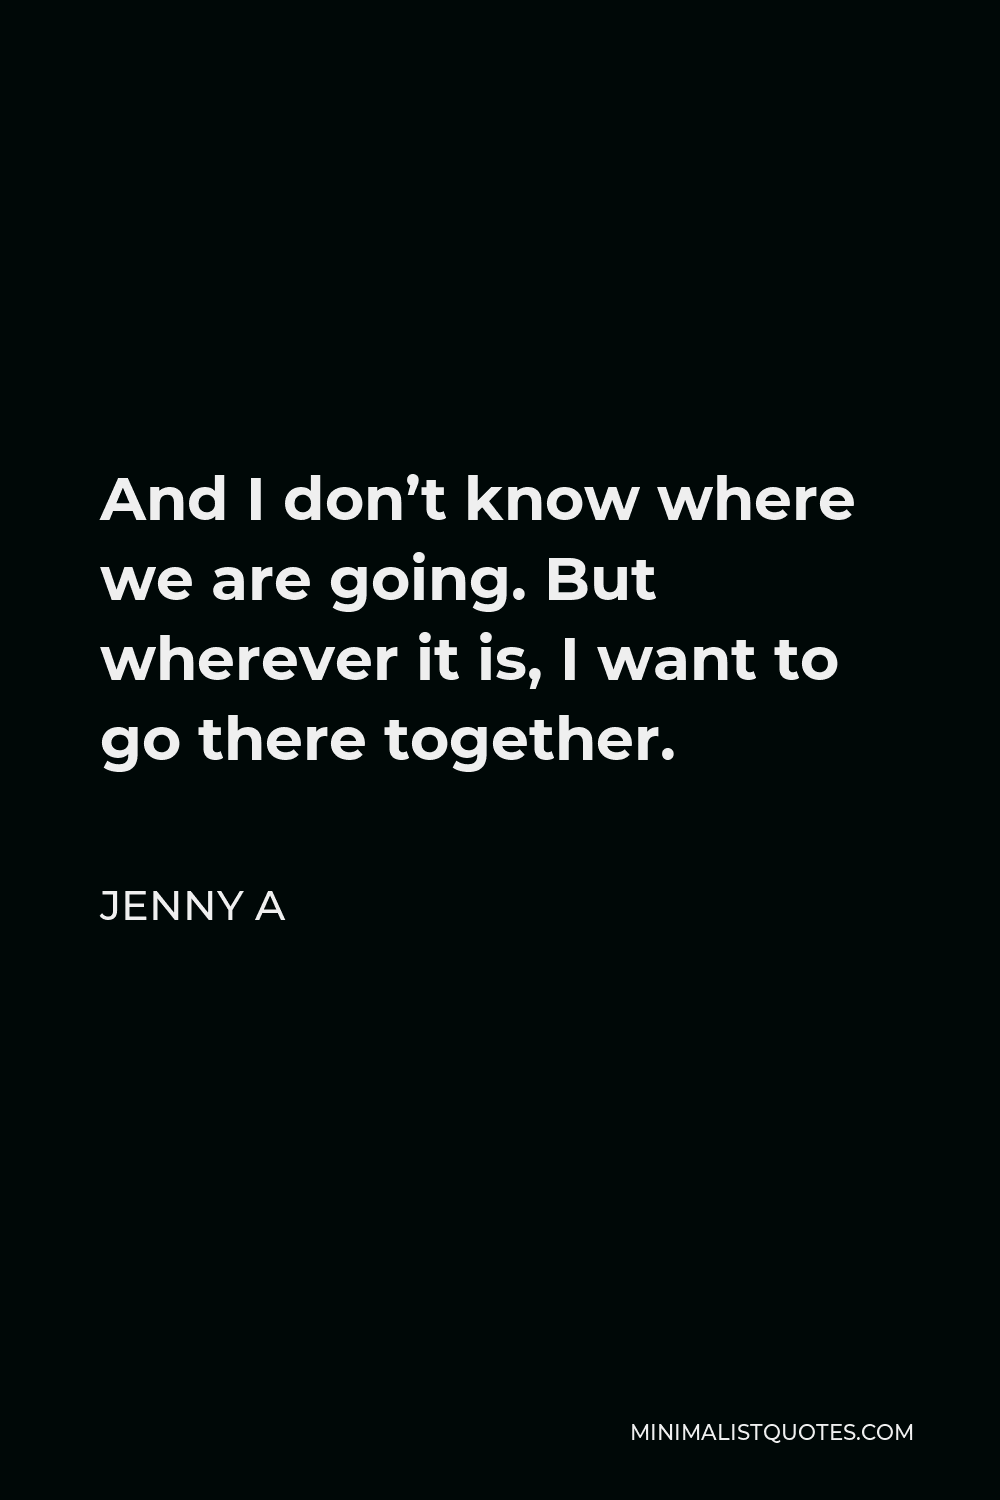 Jenny A Quote - And I don’t know where we are going. But wherever it is, I want to go there together.